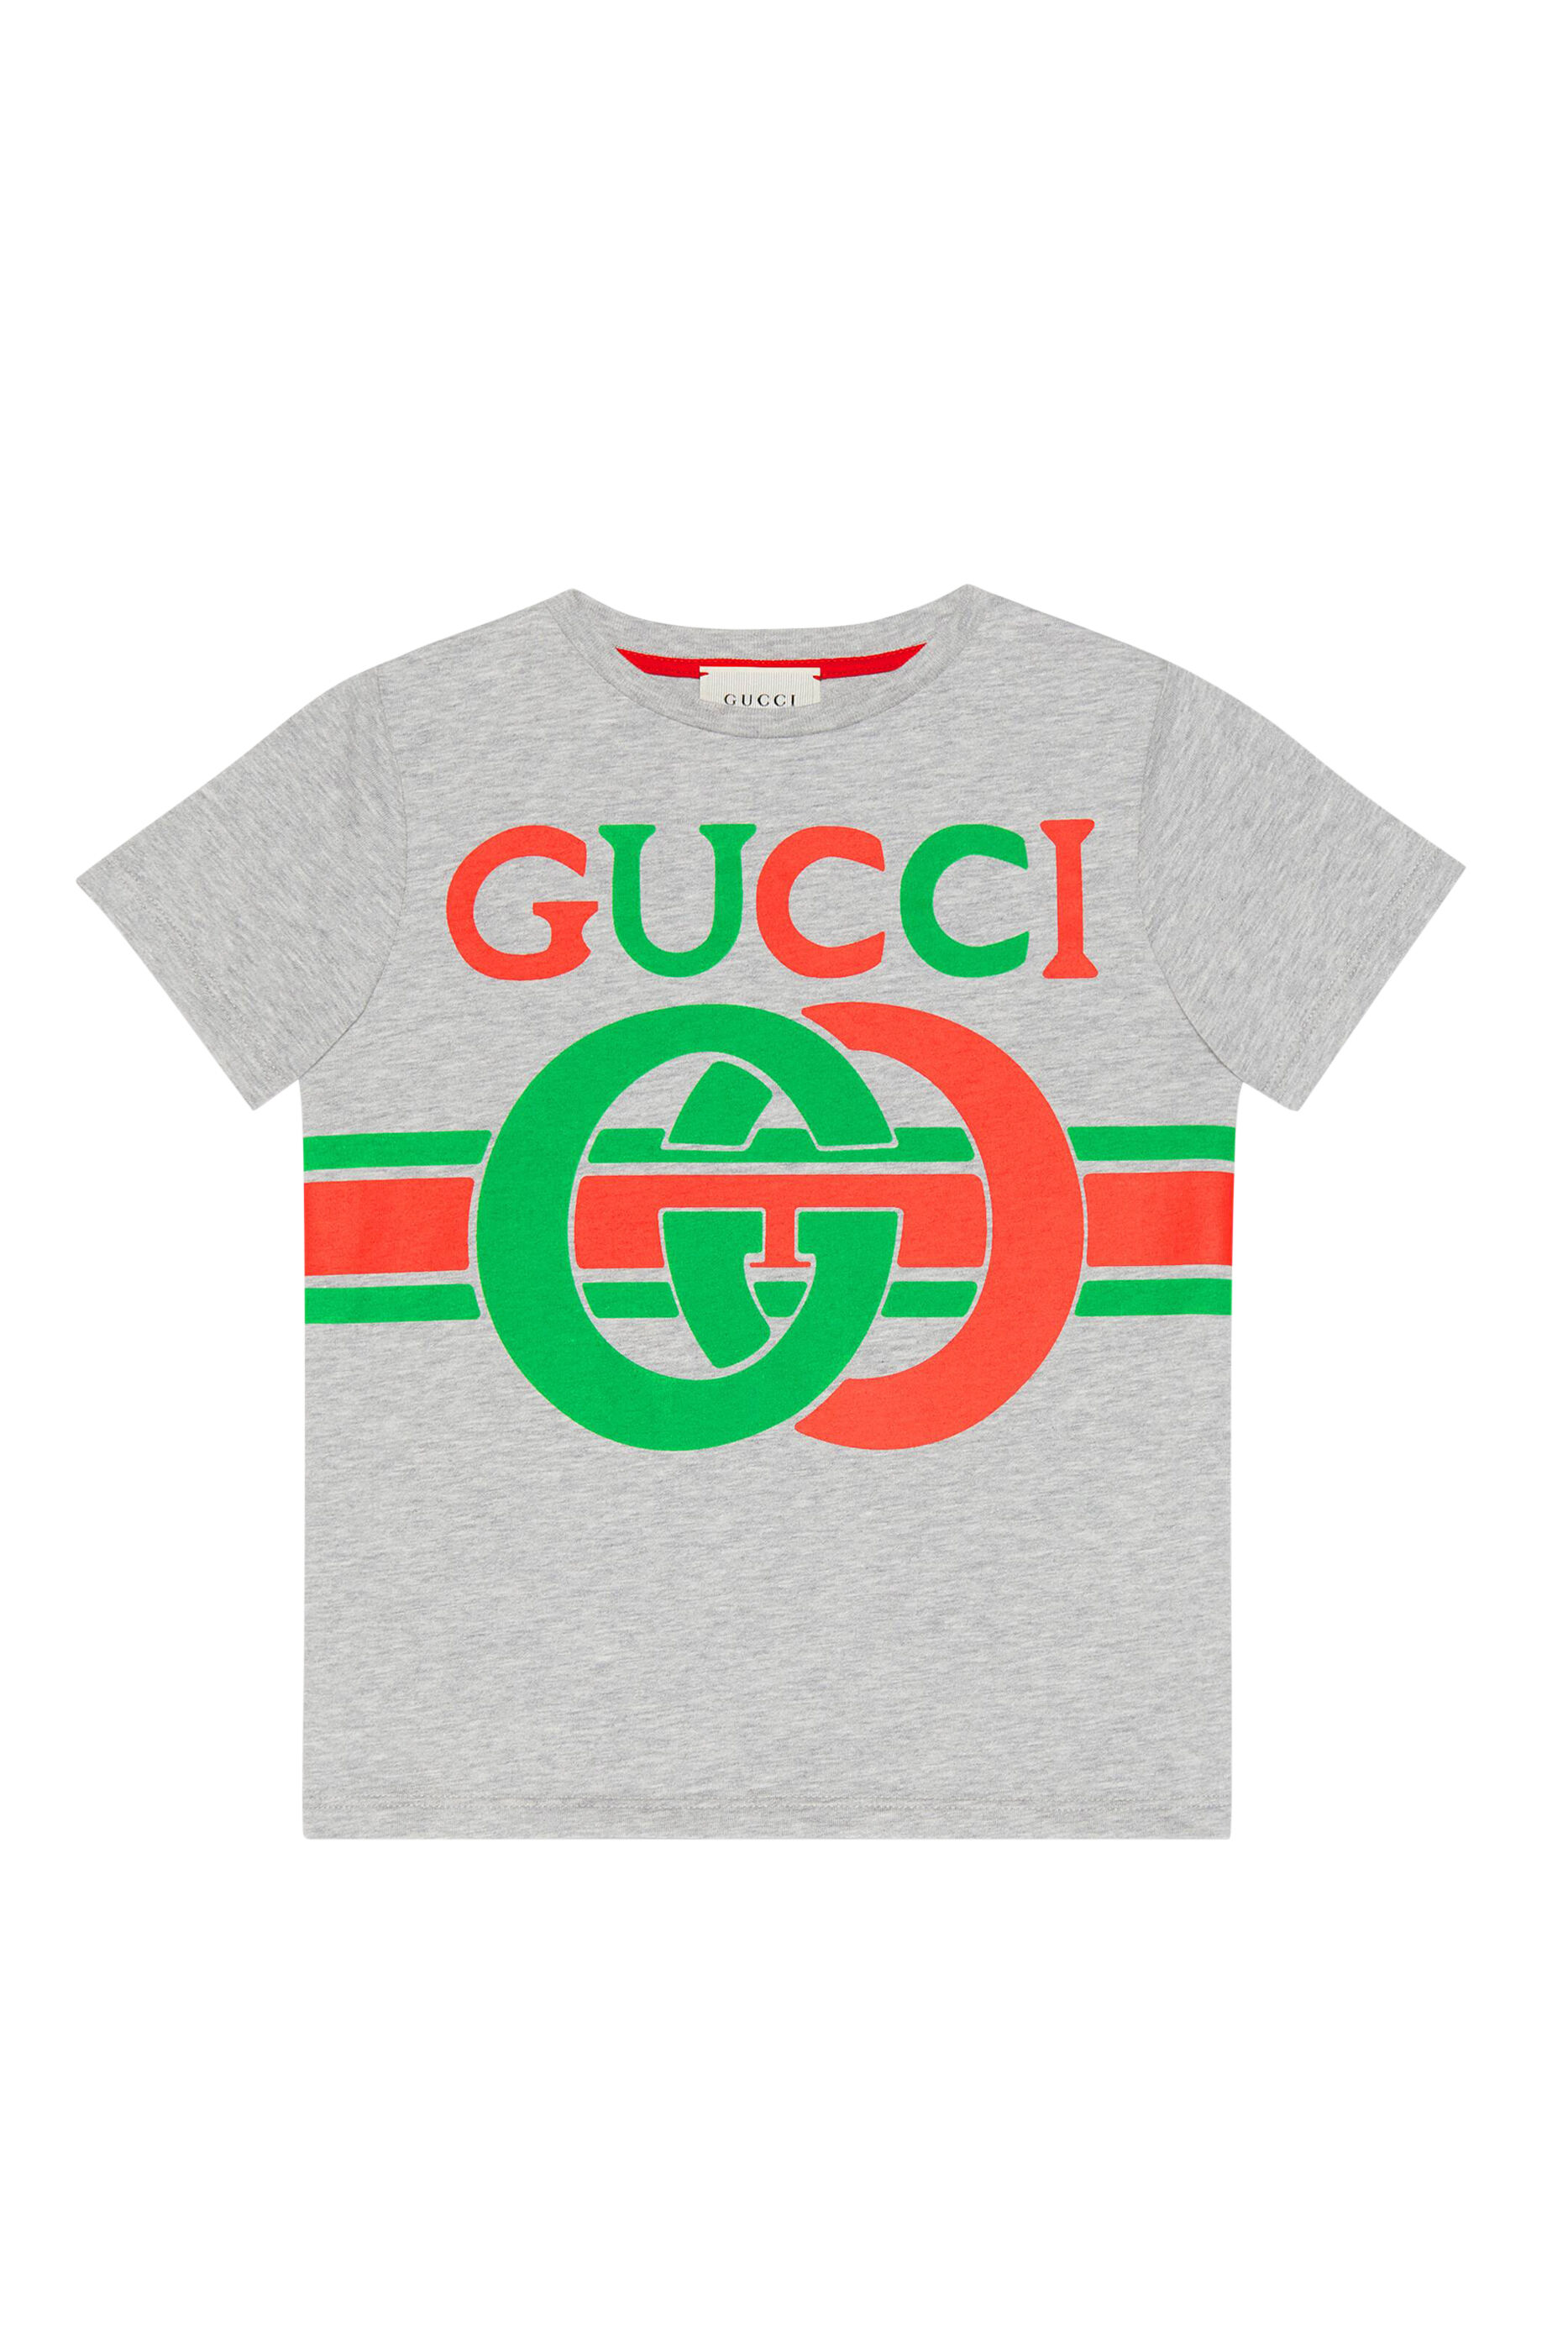 gucci clothes for sale